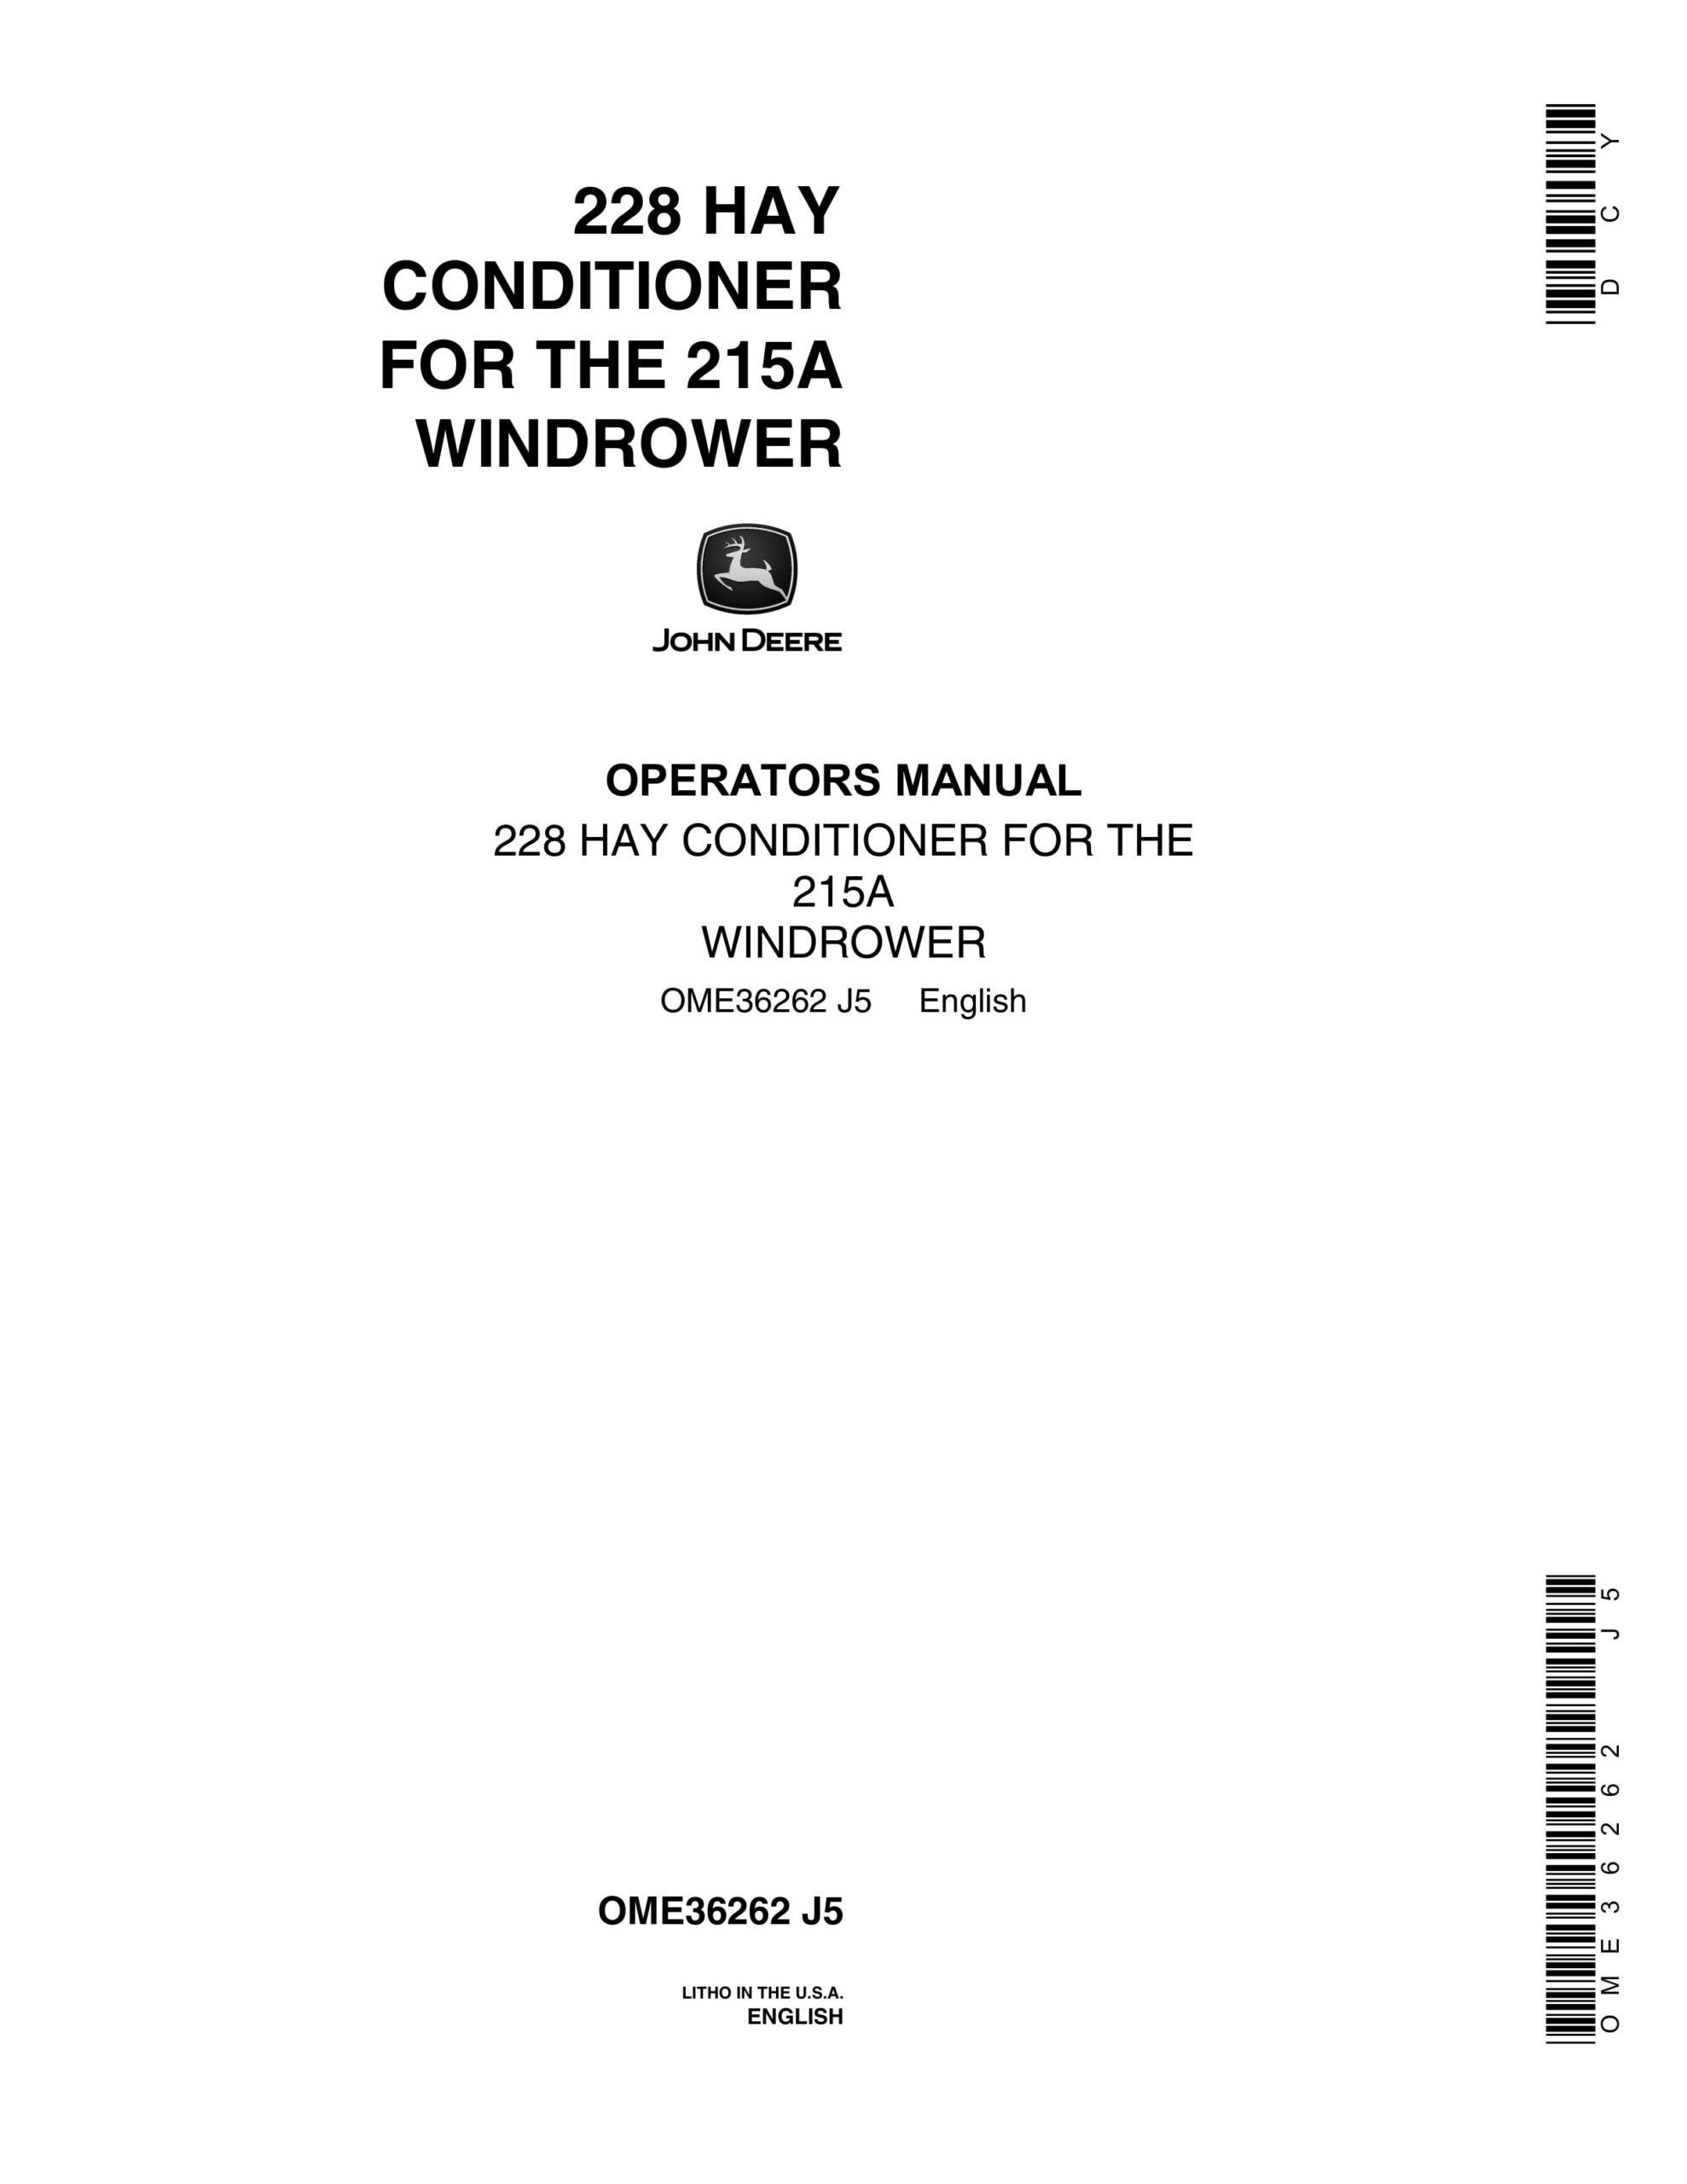 John Deere 228 HAY CONDITIONER FOR THE 215A WINDROWER Operator Manual OME36262-1